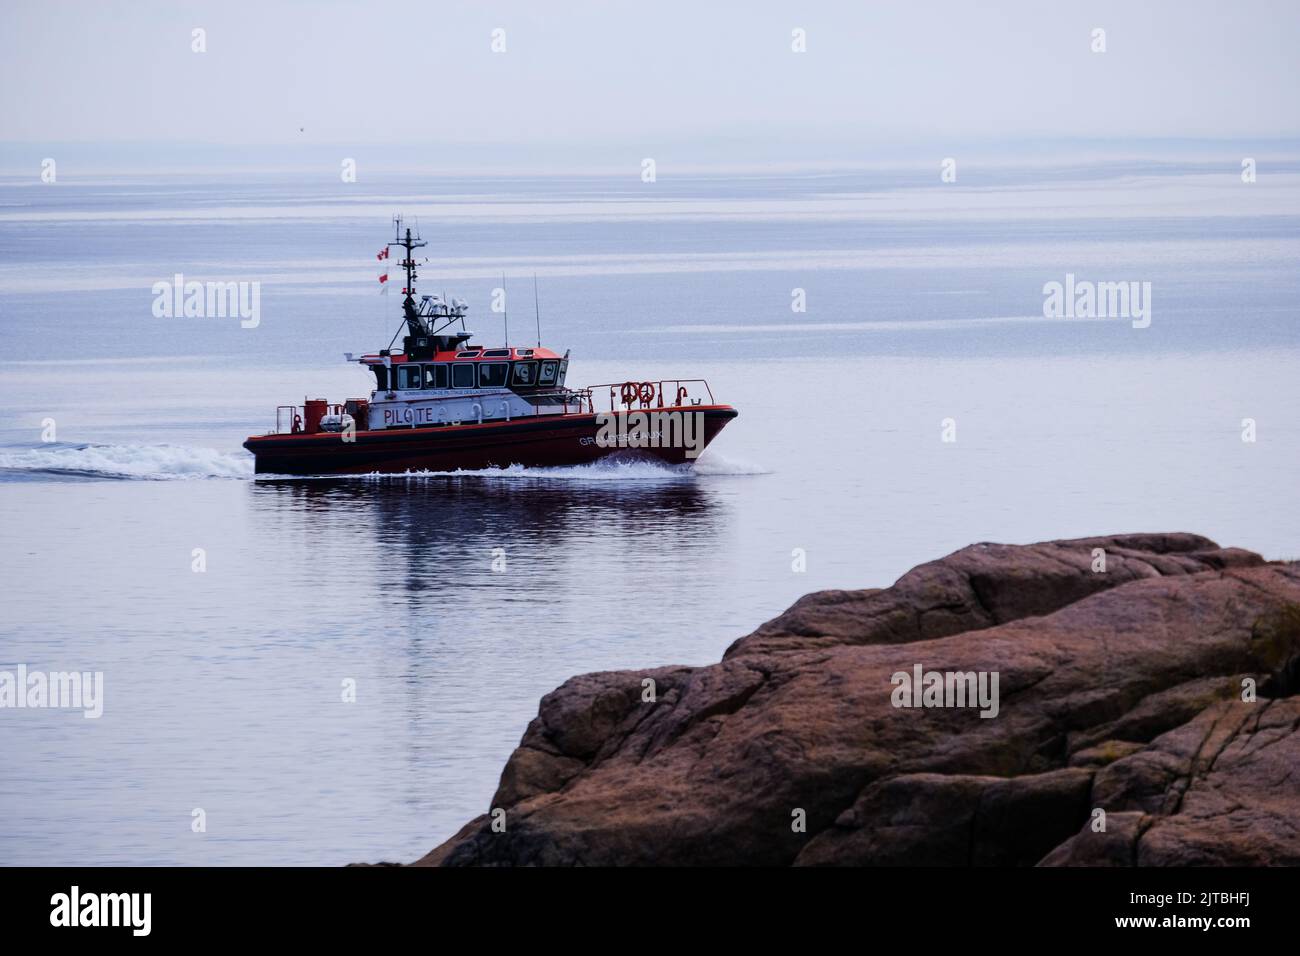 Cargo ship pilot boat on the St. Lawrence river, near Les Escoumins, Quebec, Canada. Stock Photo